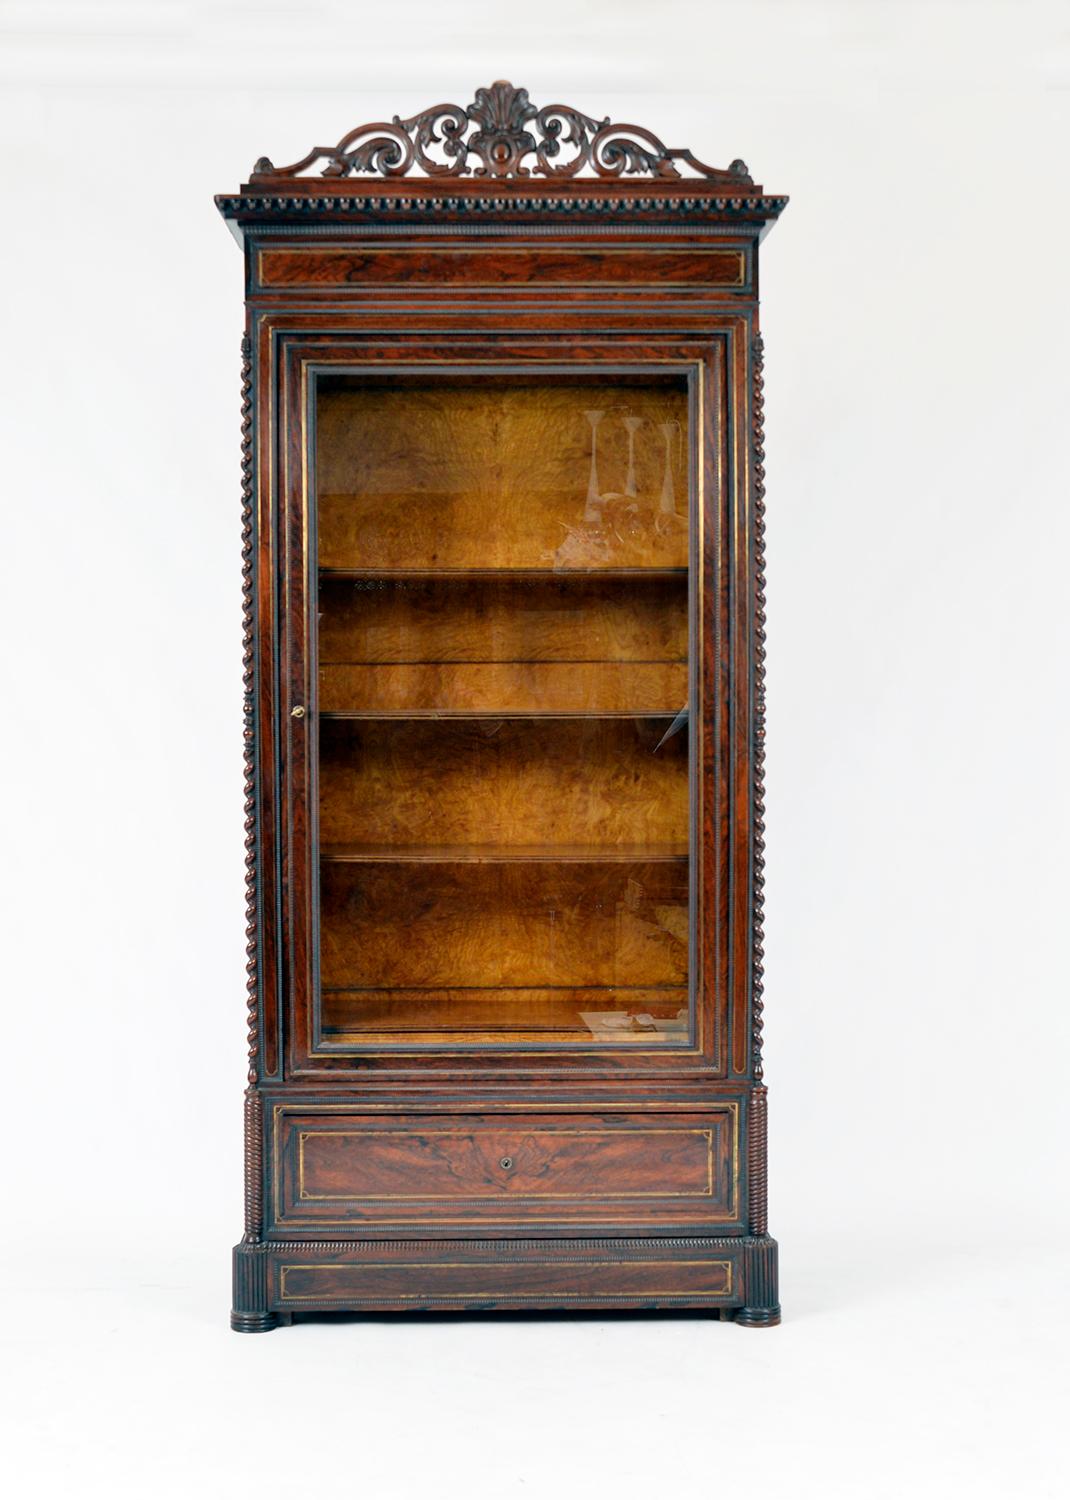 A magnificent example of 19th century French Decorative Arts. The vitrine is pure opulence and has had no expense spared, with exotic decoration and materials used from top to bottom. 
The exterior is figured rosewood with delicate brass inlay,